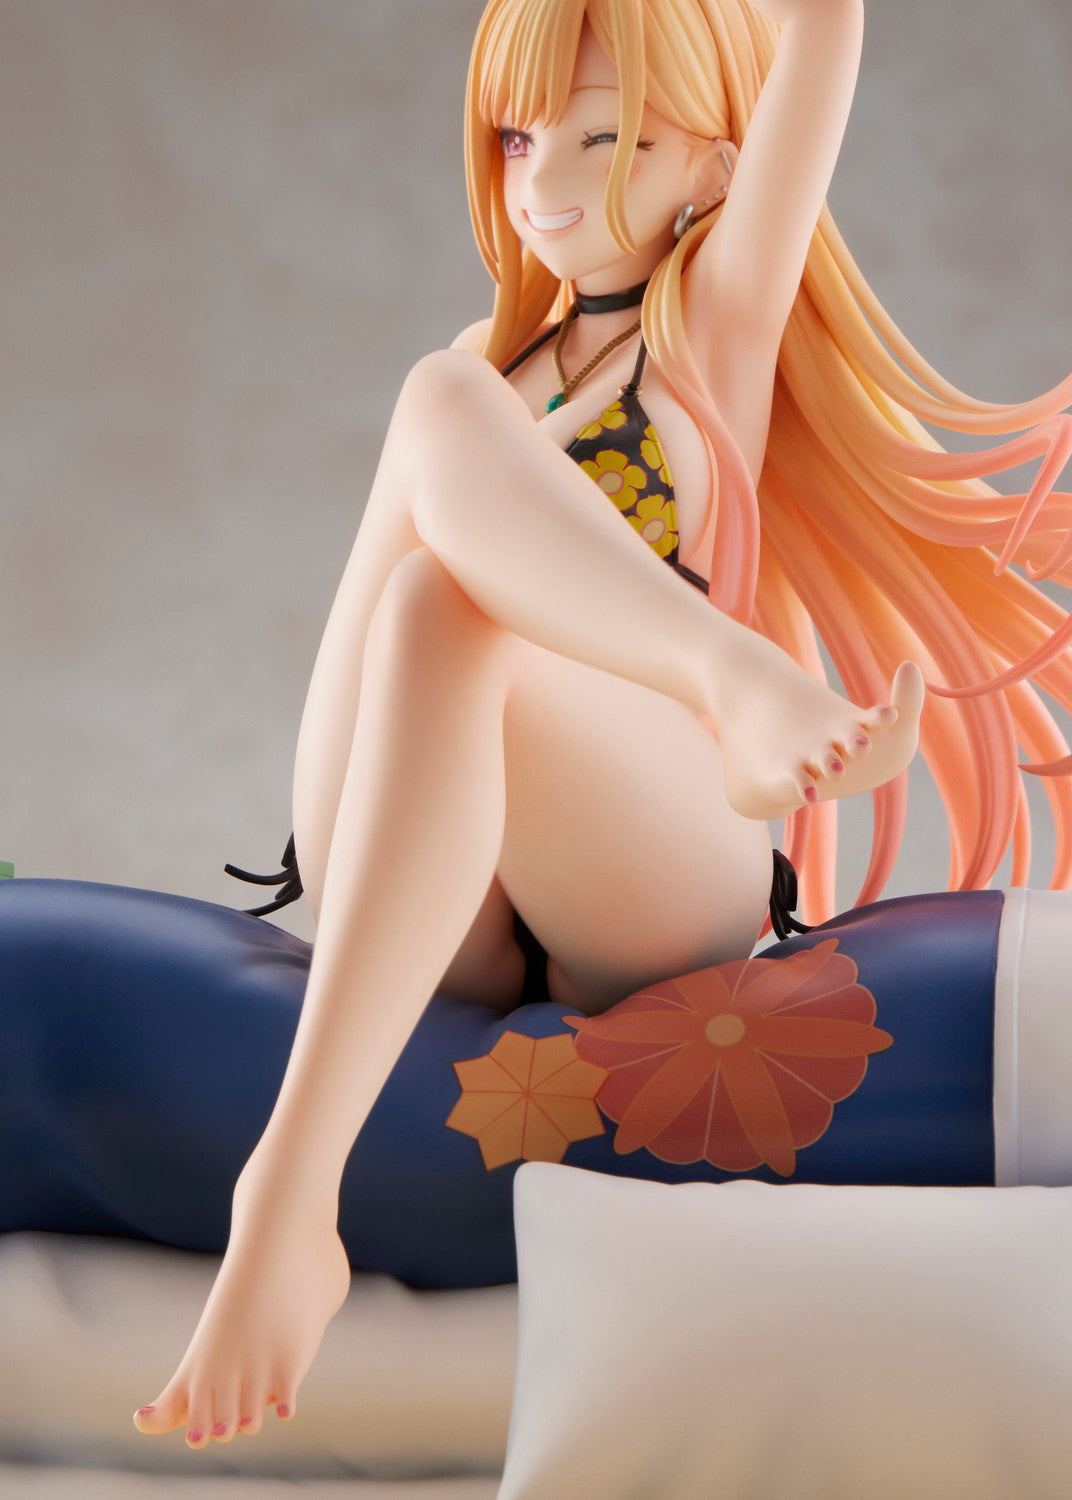 My Dress Up Darling - Marin Kitagawa 1/7 Scale Figure (Swimsuit Ver.) image count 9